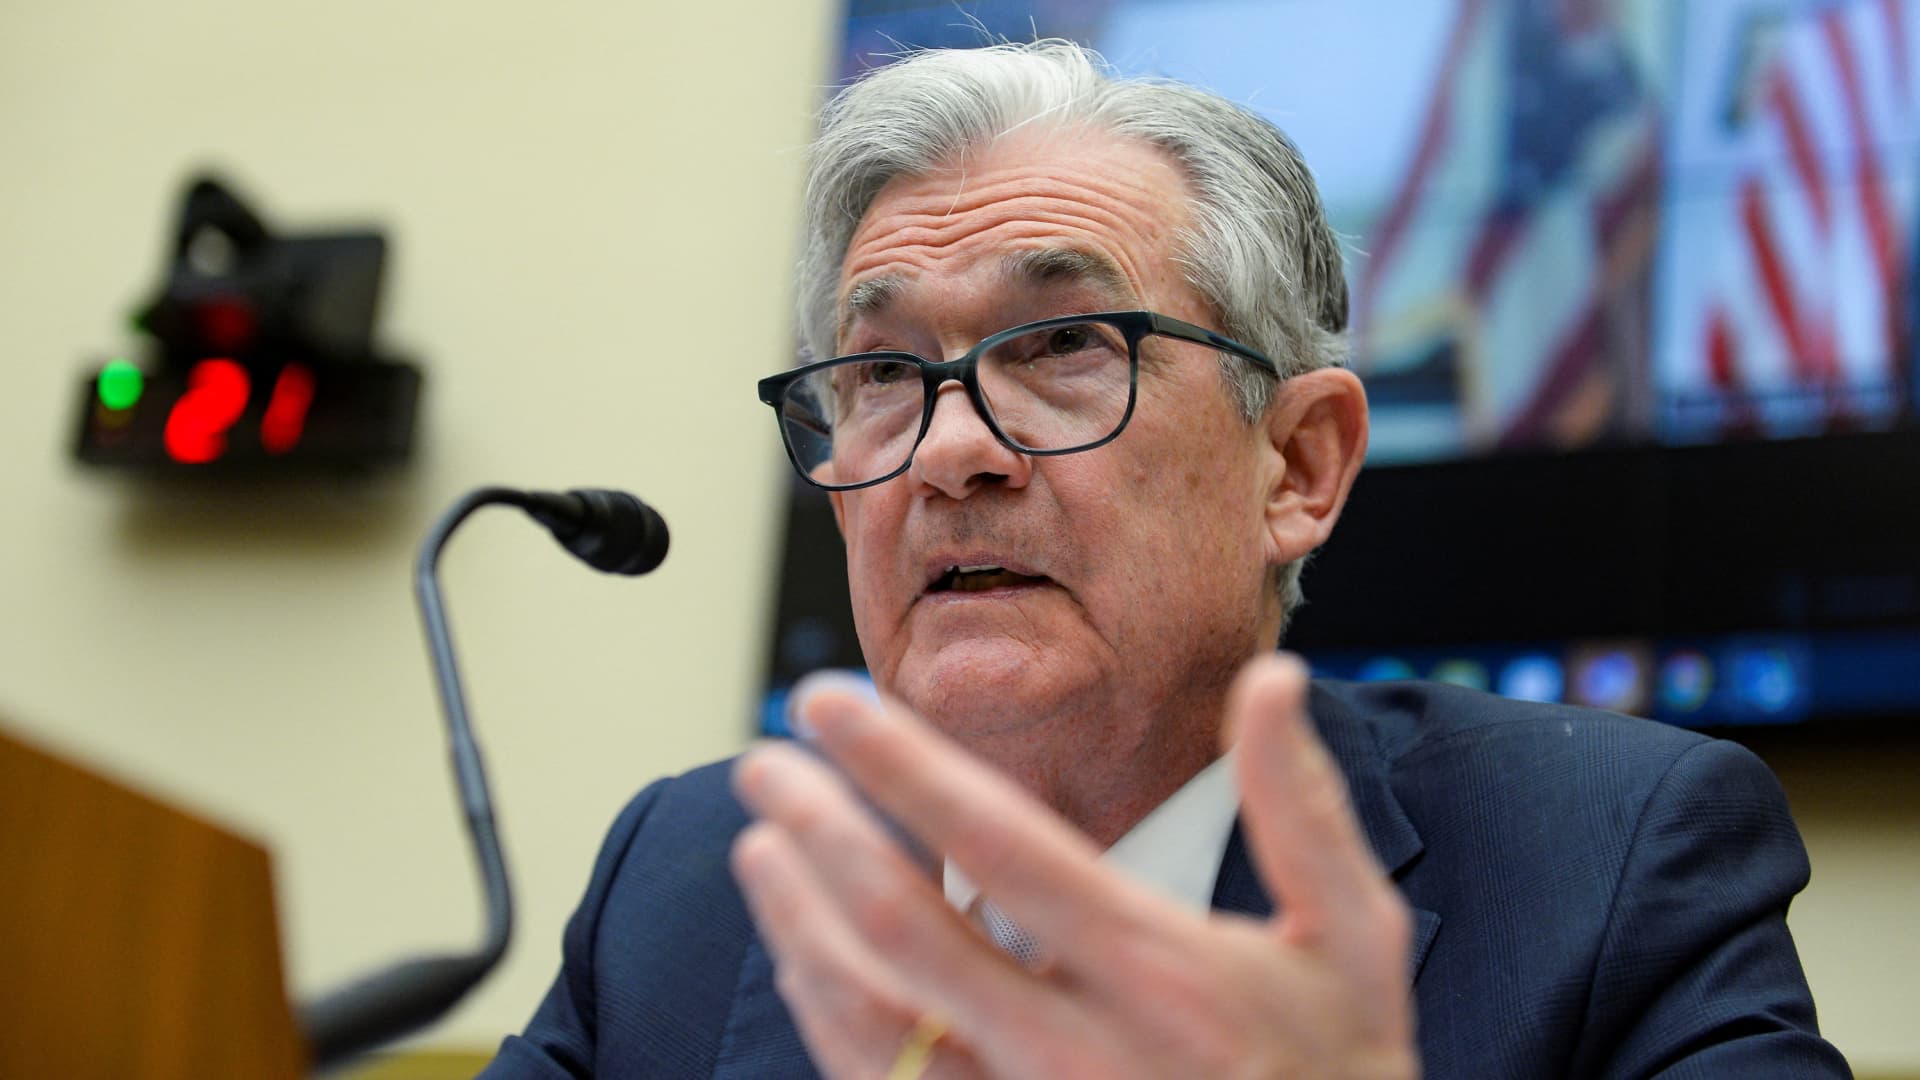 Powell vows to prevent inflation from taking hold for the long run